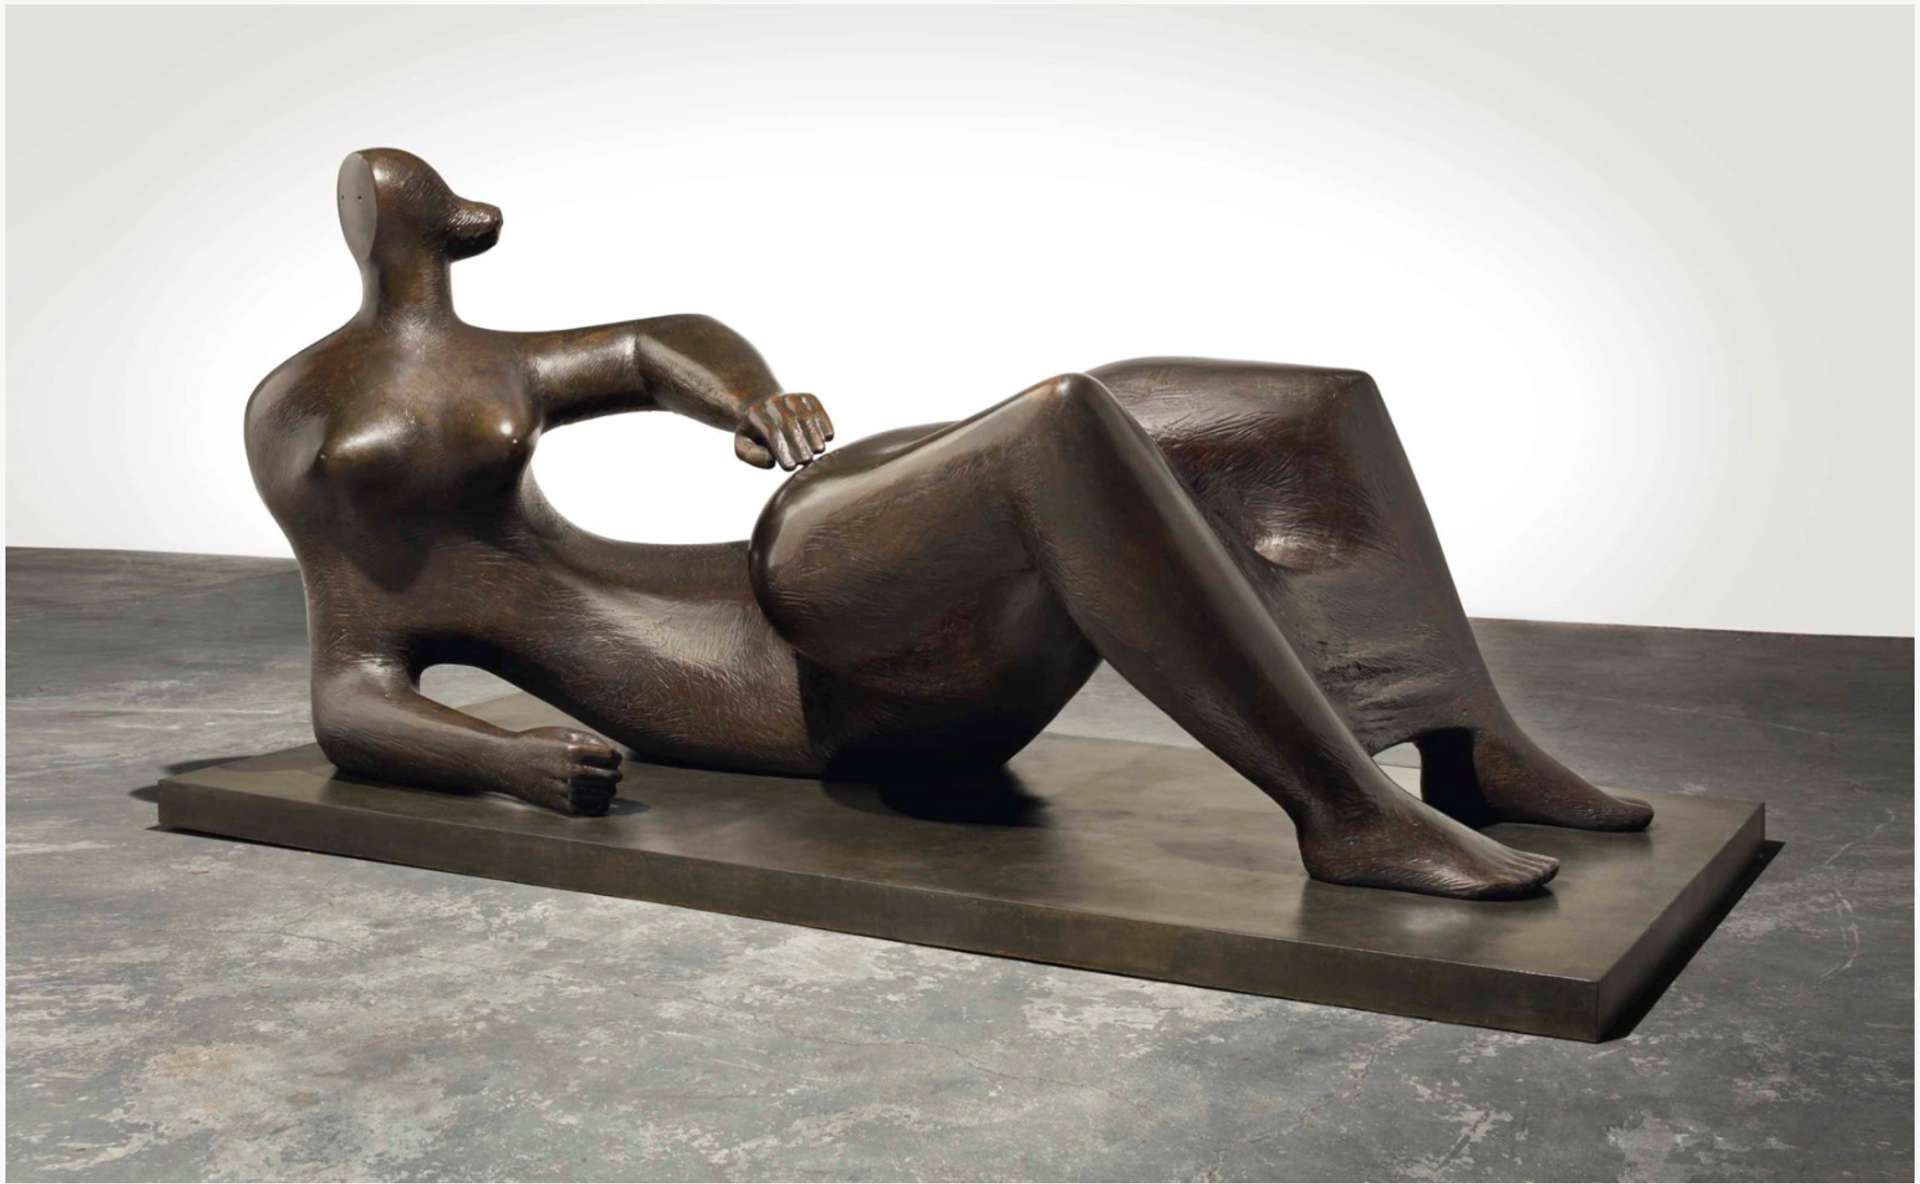  A large-scale bronze sculpture of a reclining biomorphic figure. The sculpture rests on a plinth, with the figure's feet firmly planted on the ground. One arm is raised in the air, while the elbow rests on the ground. The photograph captures the sculpture in an open white gallery space.